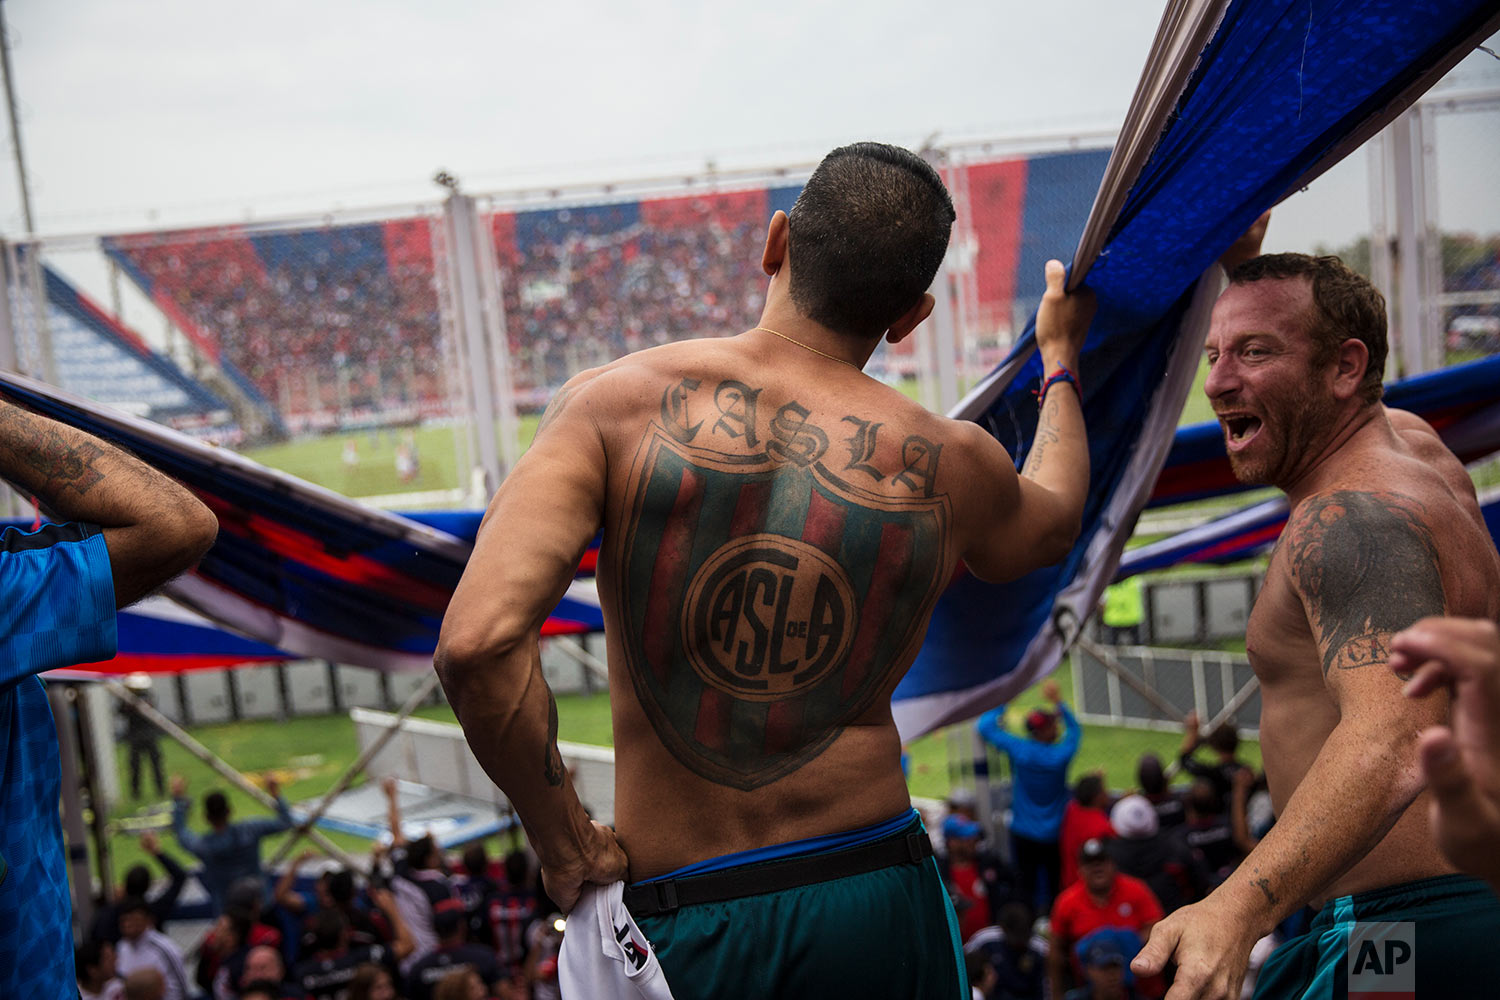  In this April 8, 2018 photo published in June, San Lorenzo soccer fans who are part of the team's most militant fan base, coined "La Butteler," sing and dance in the grandstand during a match against Godoy Cruz in Buenos Aires, Argentina. (AP Photo/